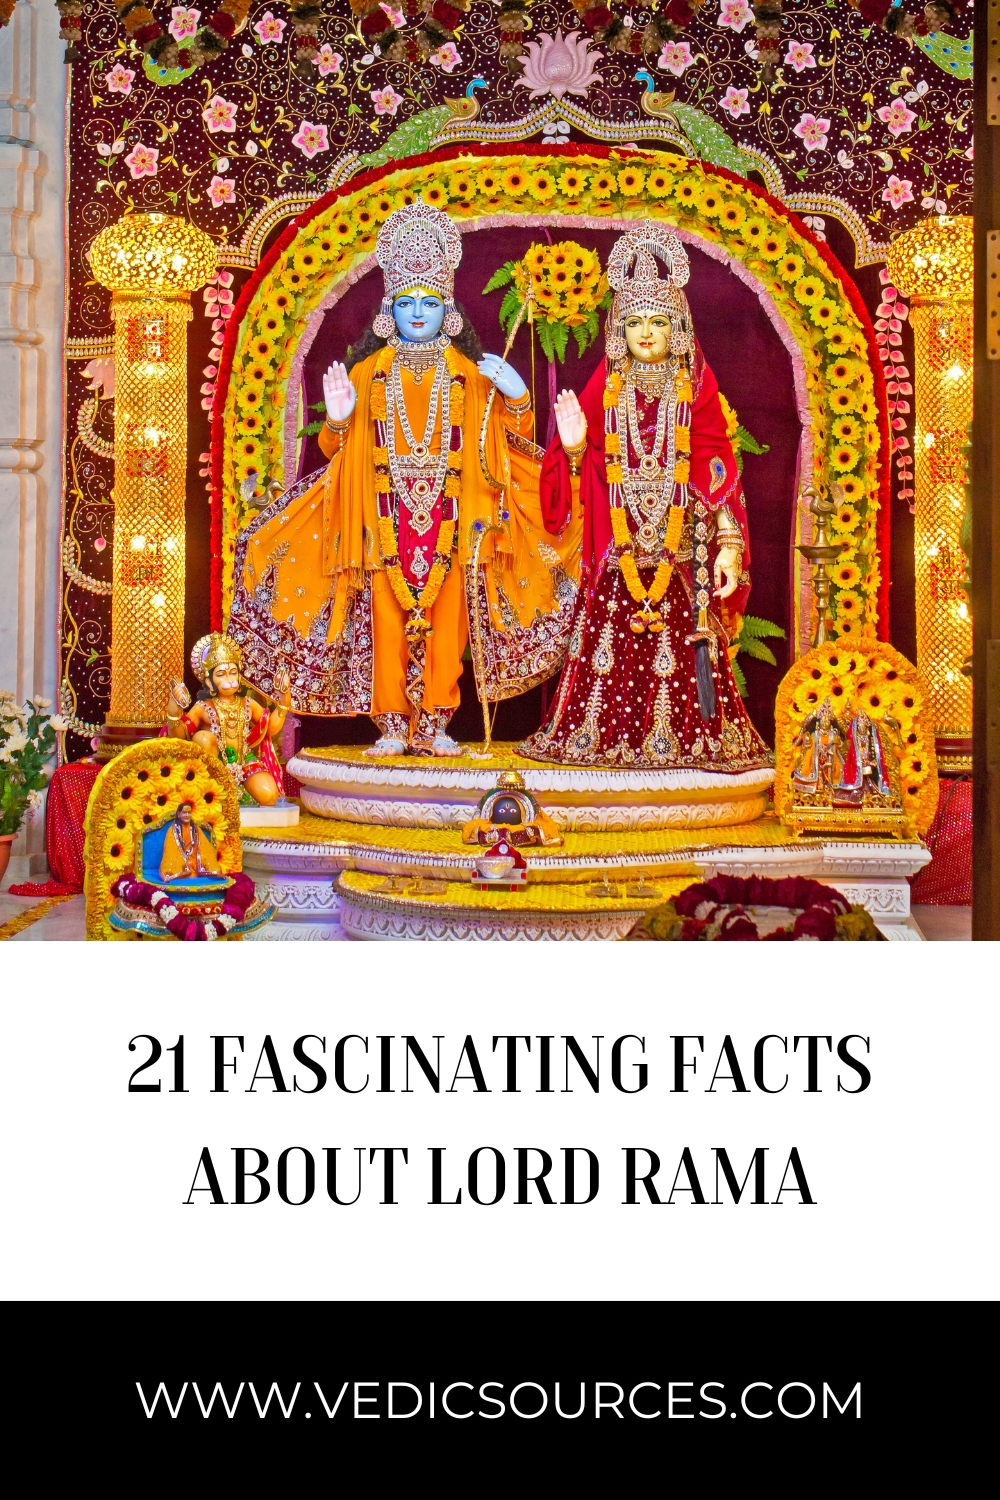 21 Fascinating Facts About Lord Rama